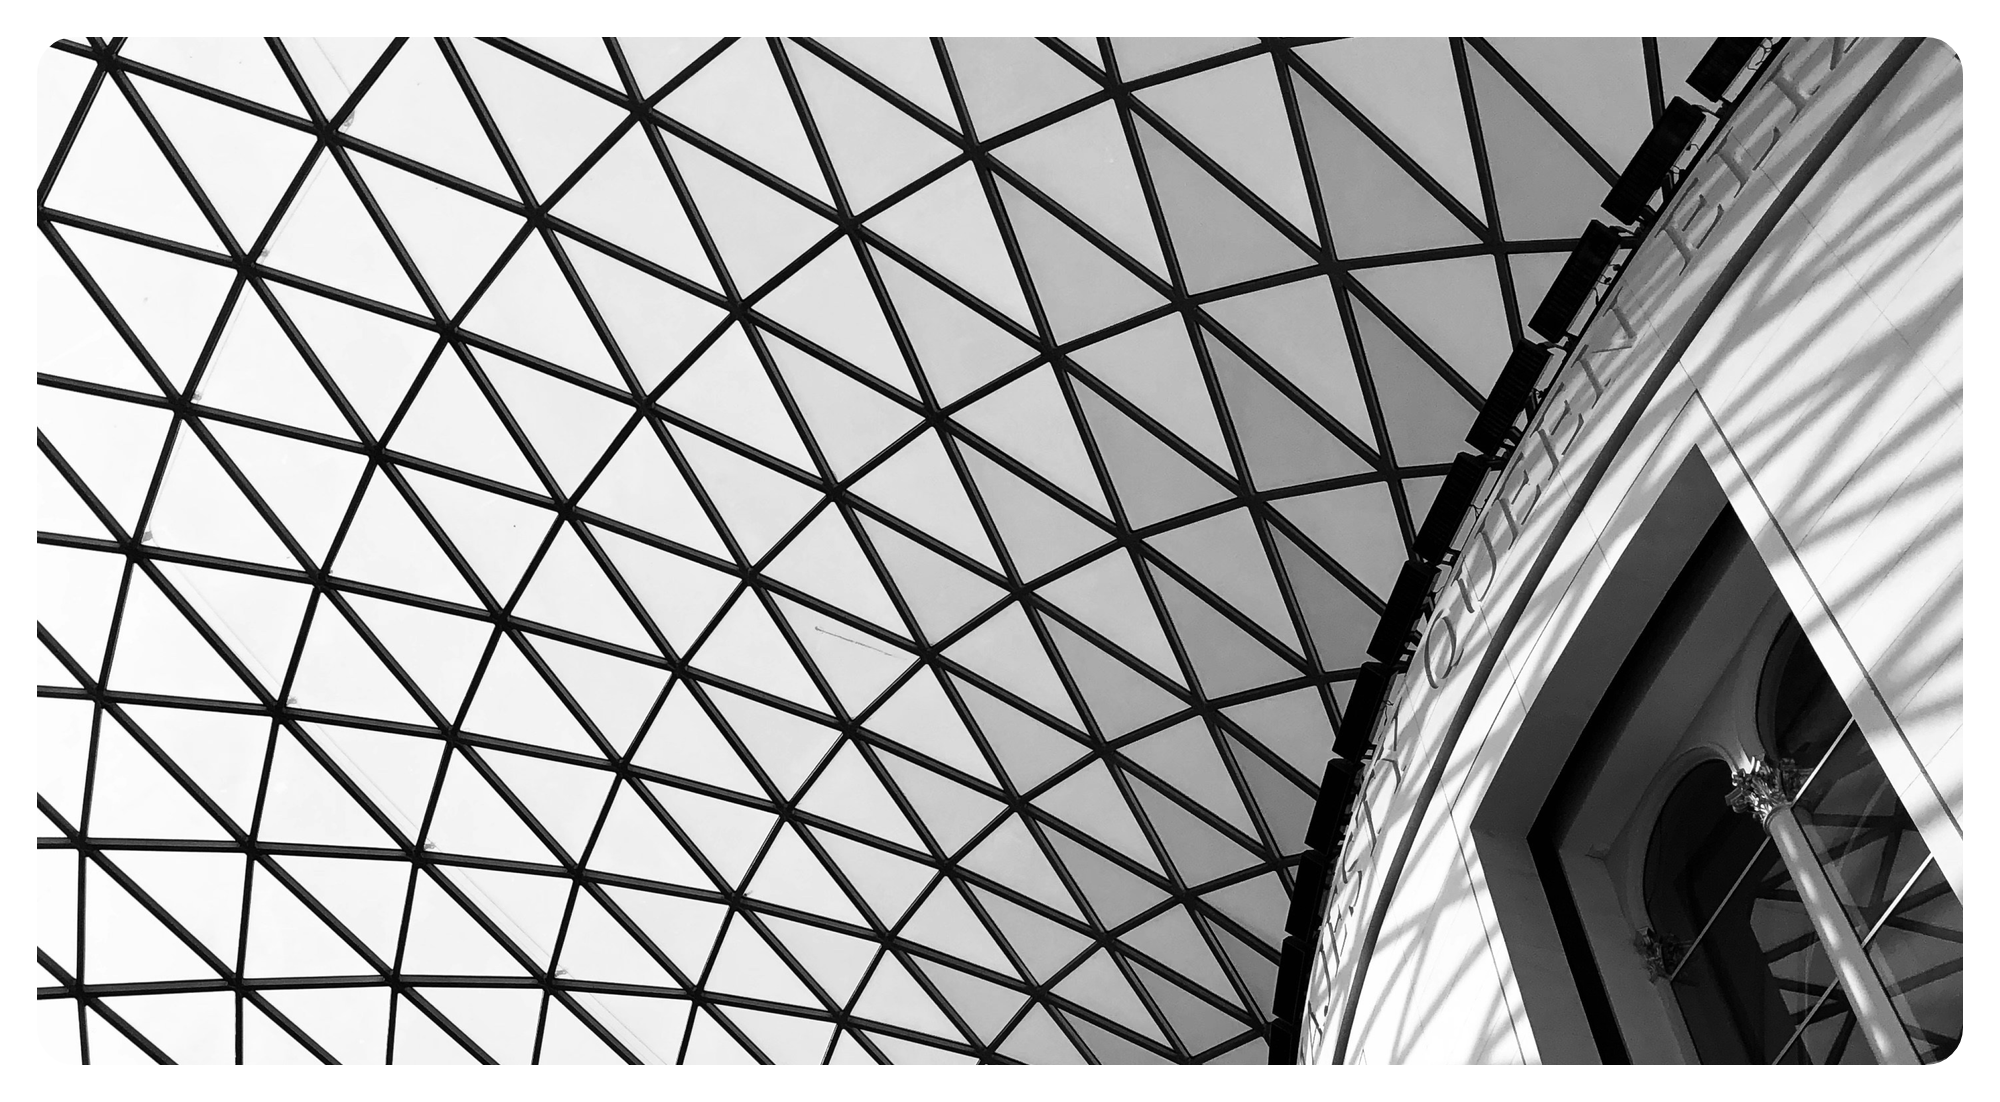 4 Hacks to Improve Your Visit at The British Museum